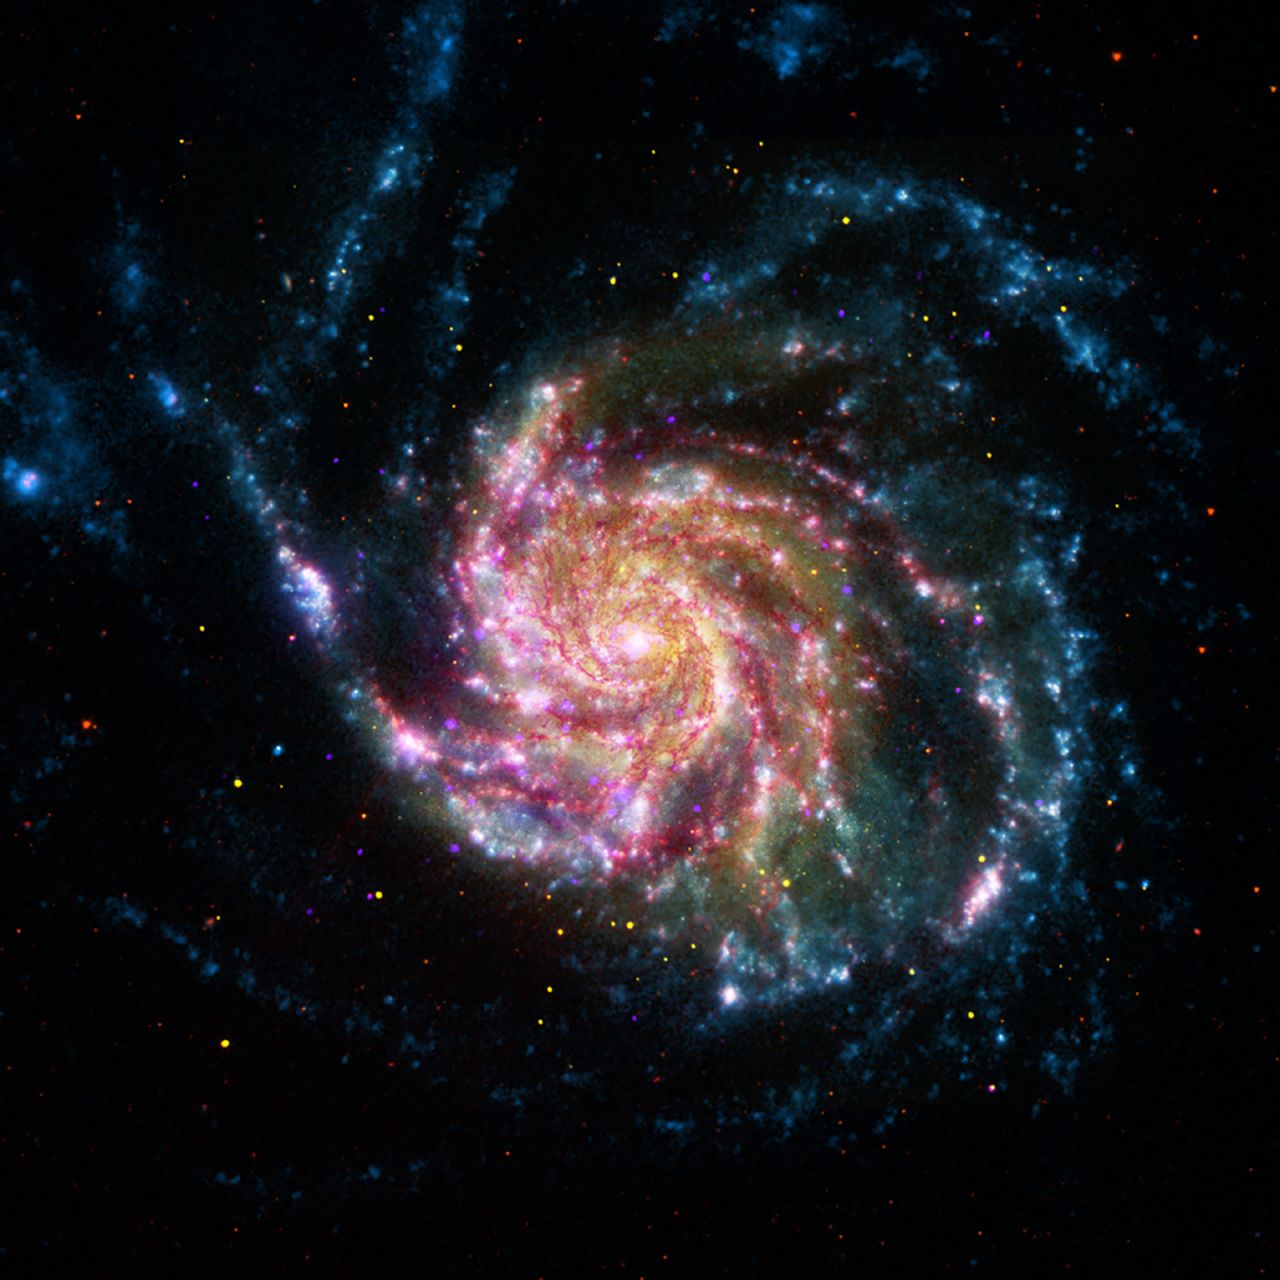 This image of the Pinwheel Galaxy combines data in the infrared, visible, ultraviolet and x-rays from four of NASA's space telescopes, revealing young and old stars.